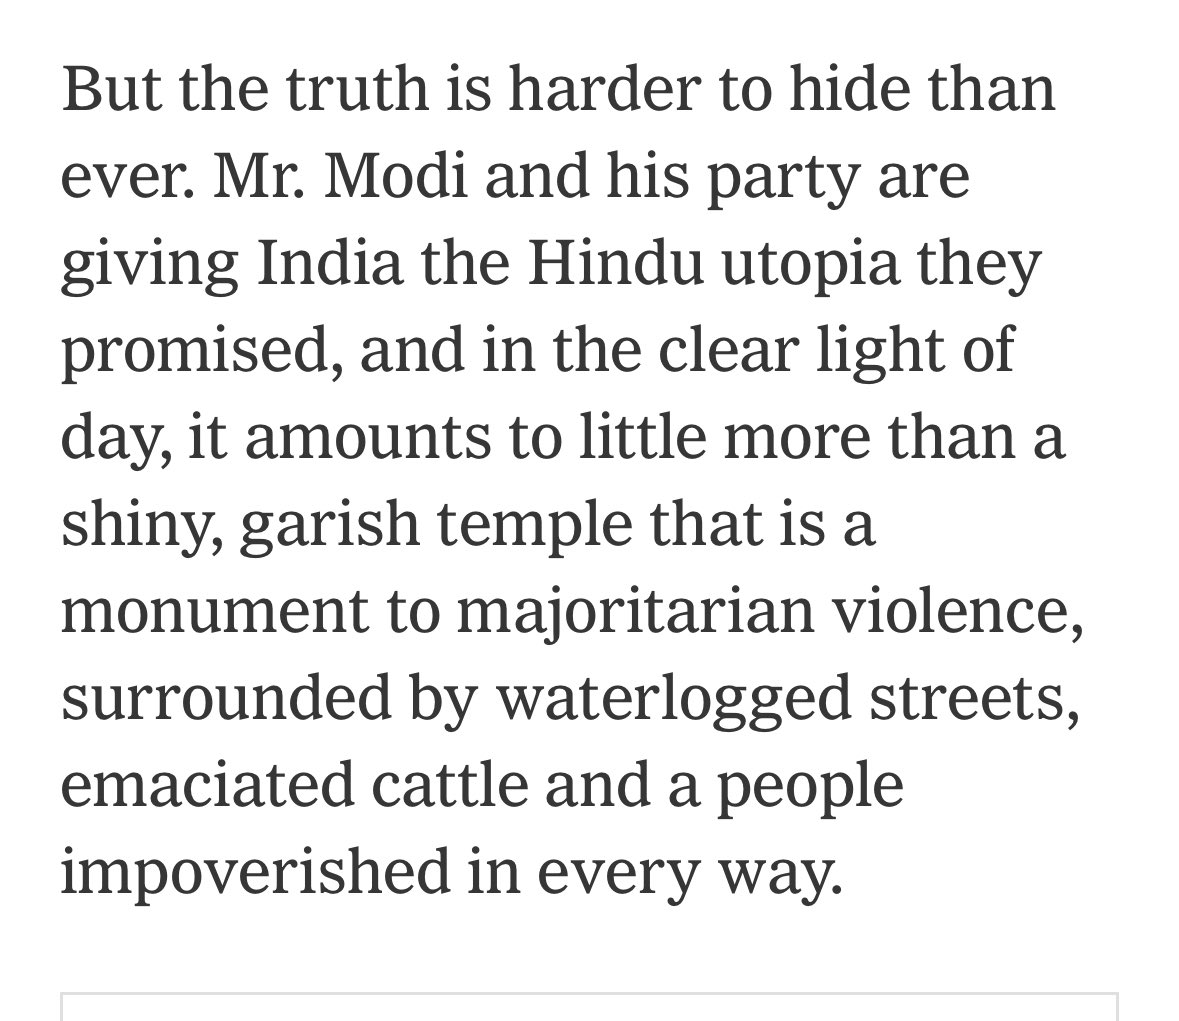 Poor Indians, starving cows, garish temples! Not surprised that @nytopinion publishes peak orientalist hate, just that editors allows so much sneering contempt to be stuffed into one paragraph!